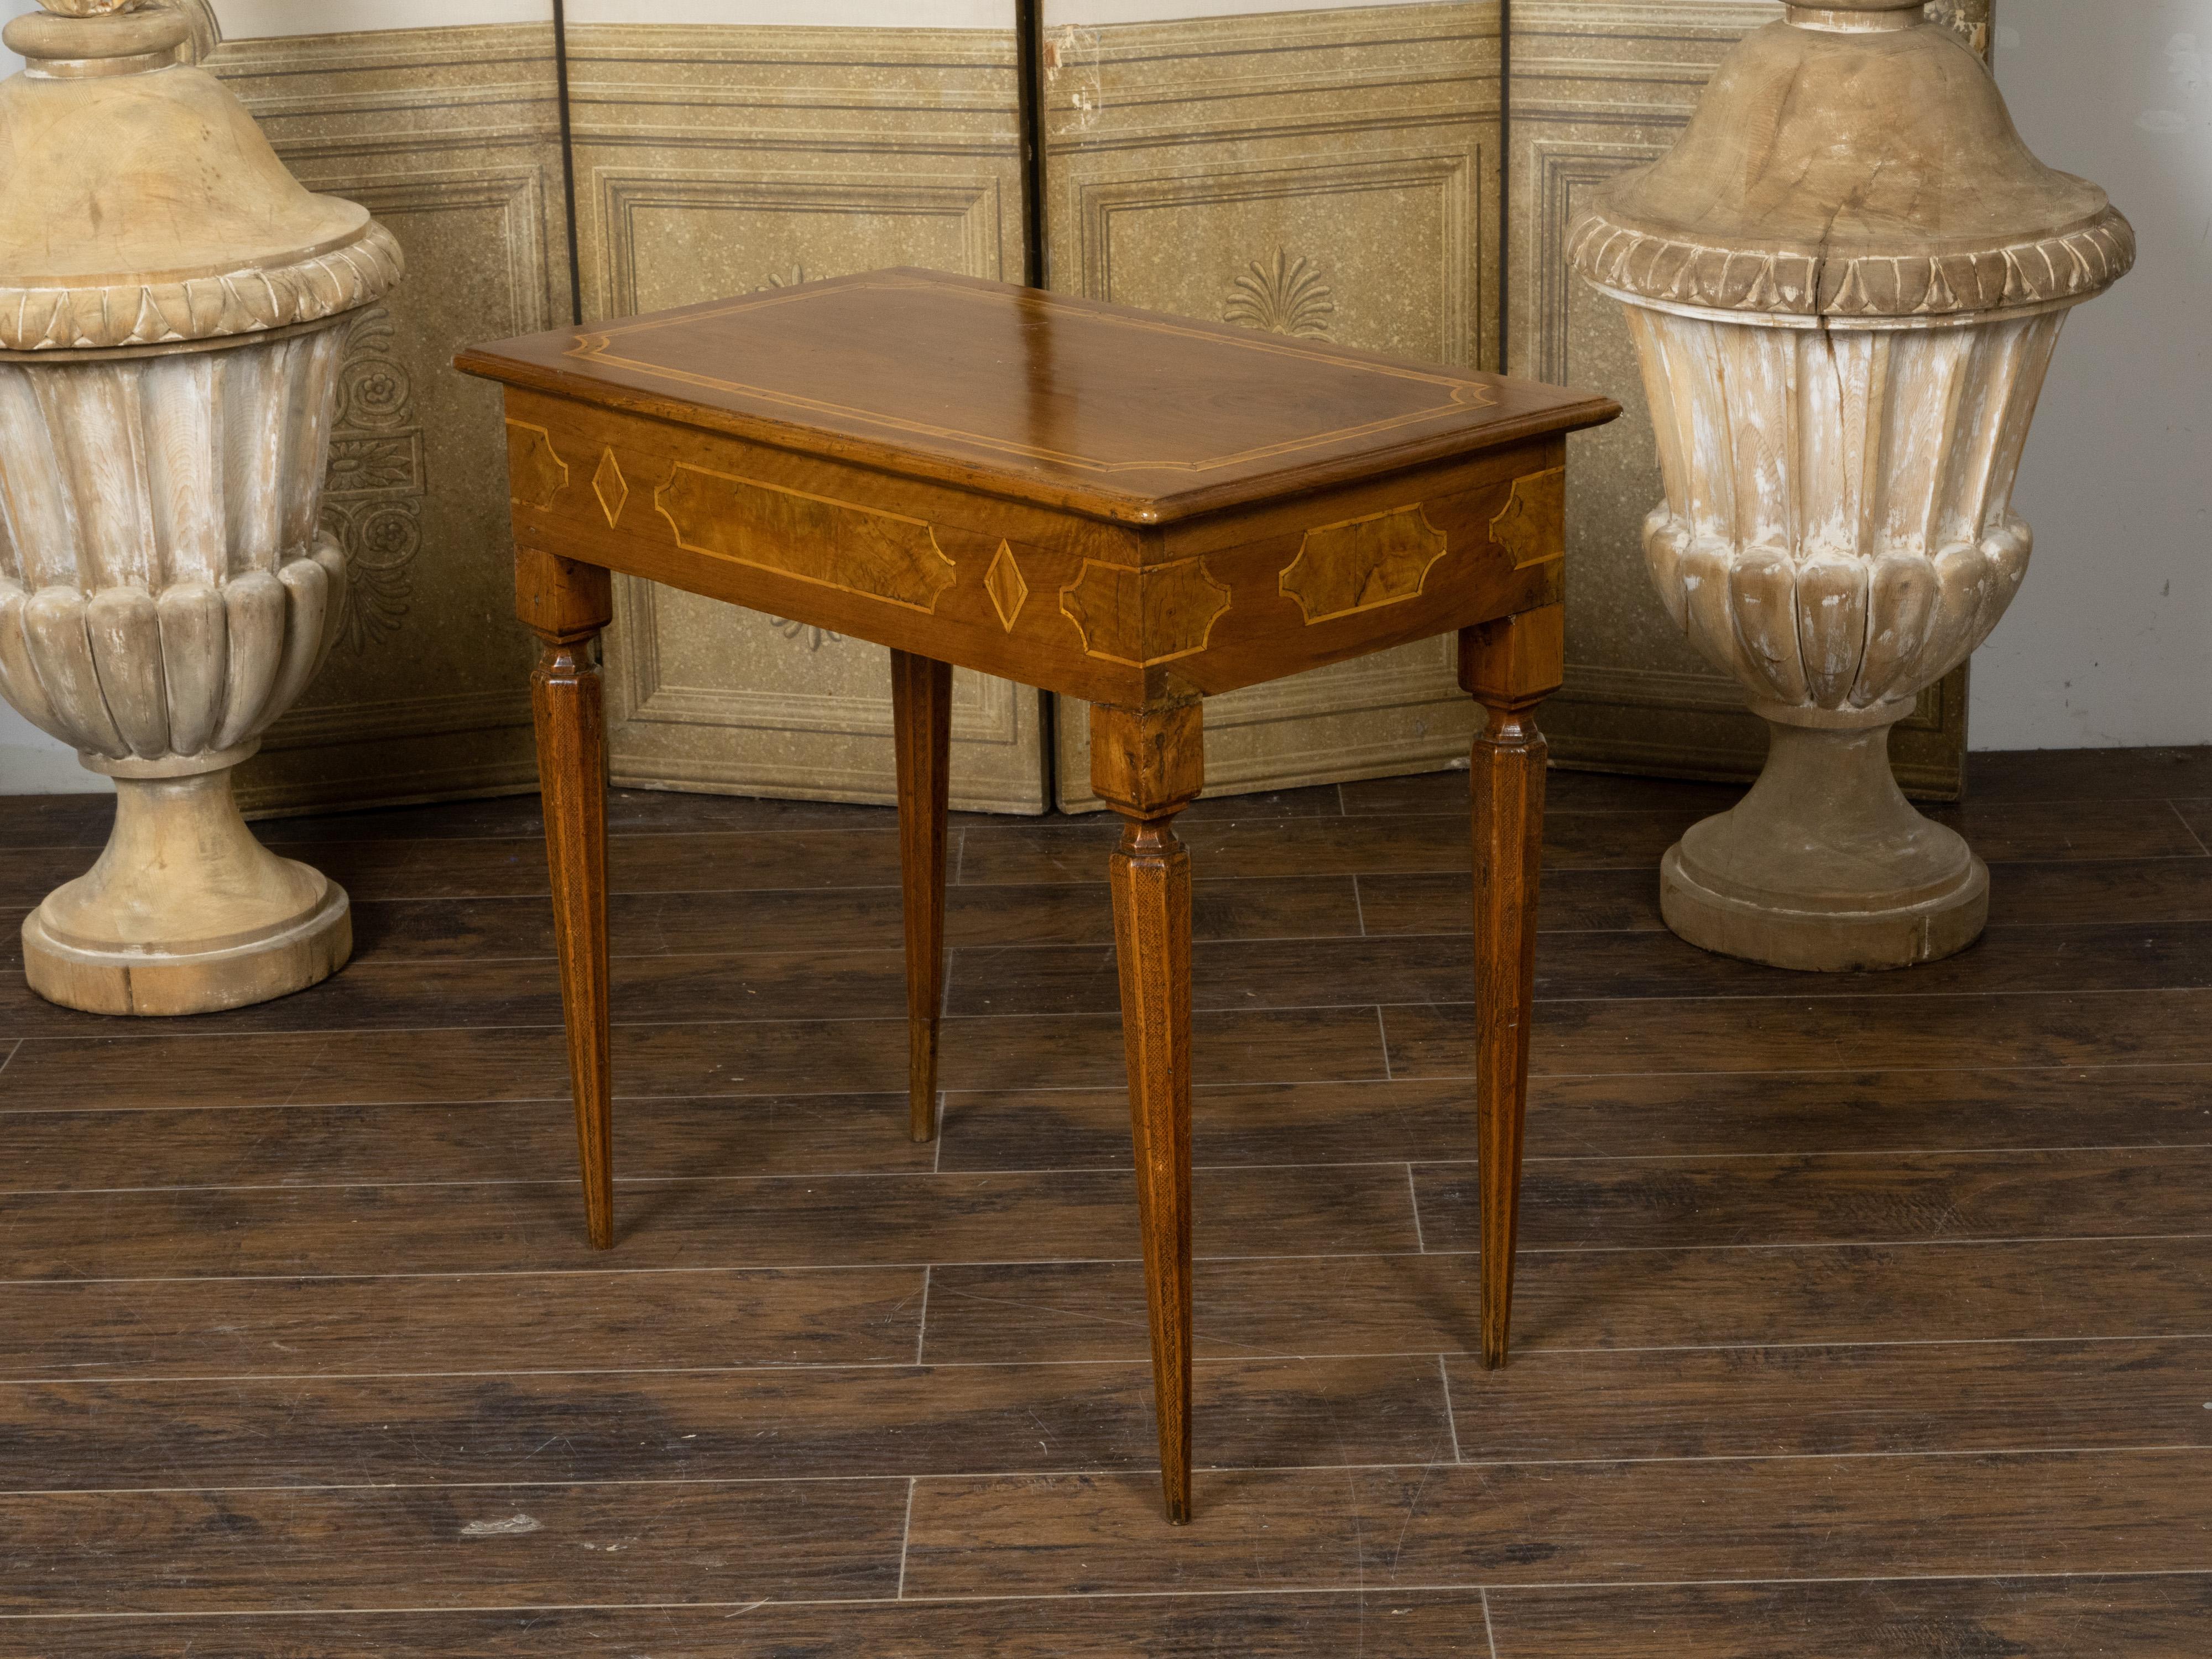 Italian Neoclassical Period 18th Century Walnut Console Table with Cross Banding For Sale 2